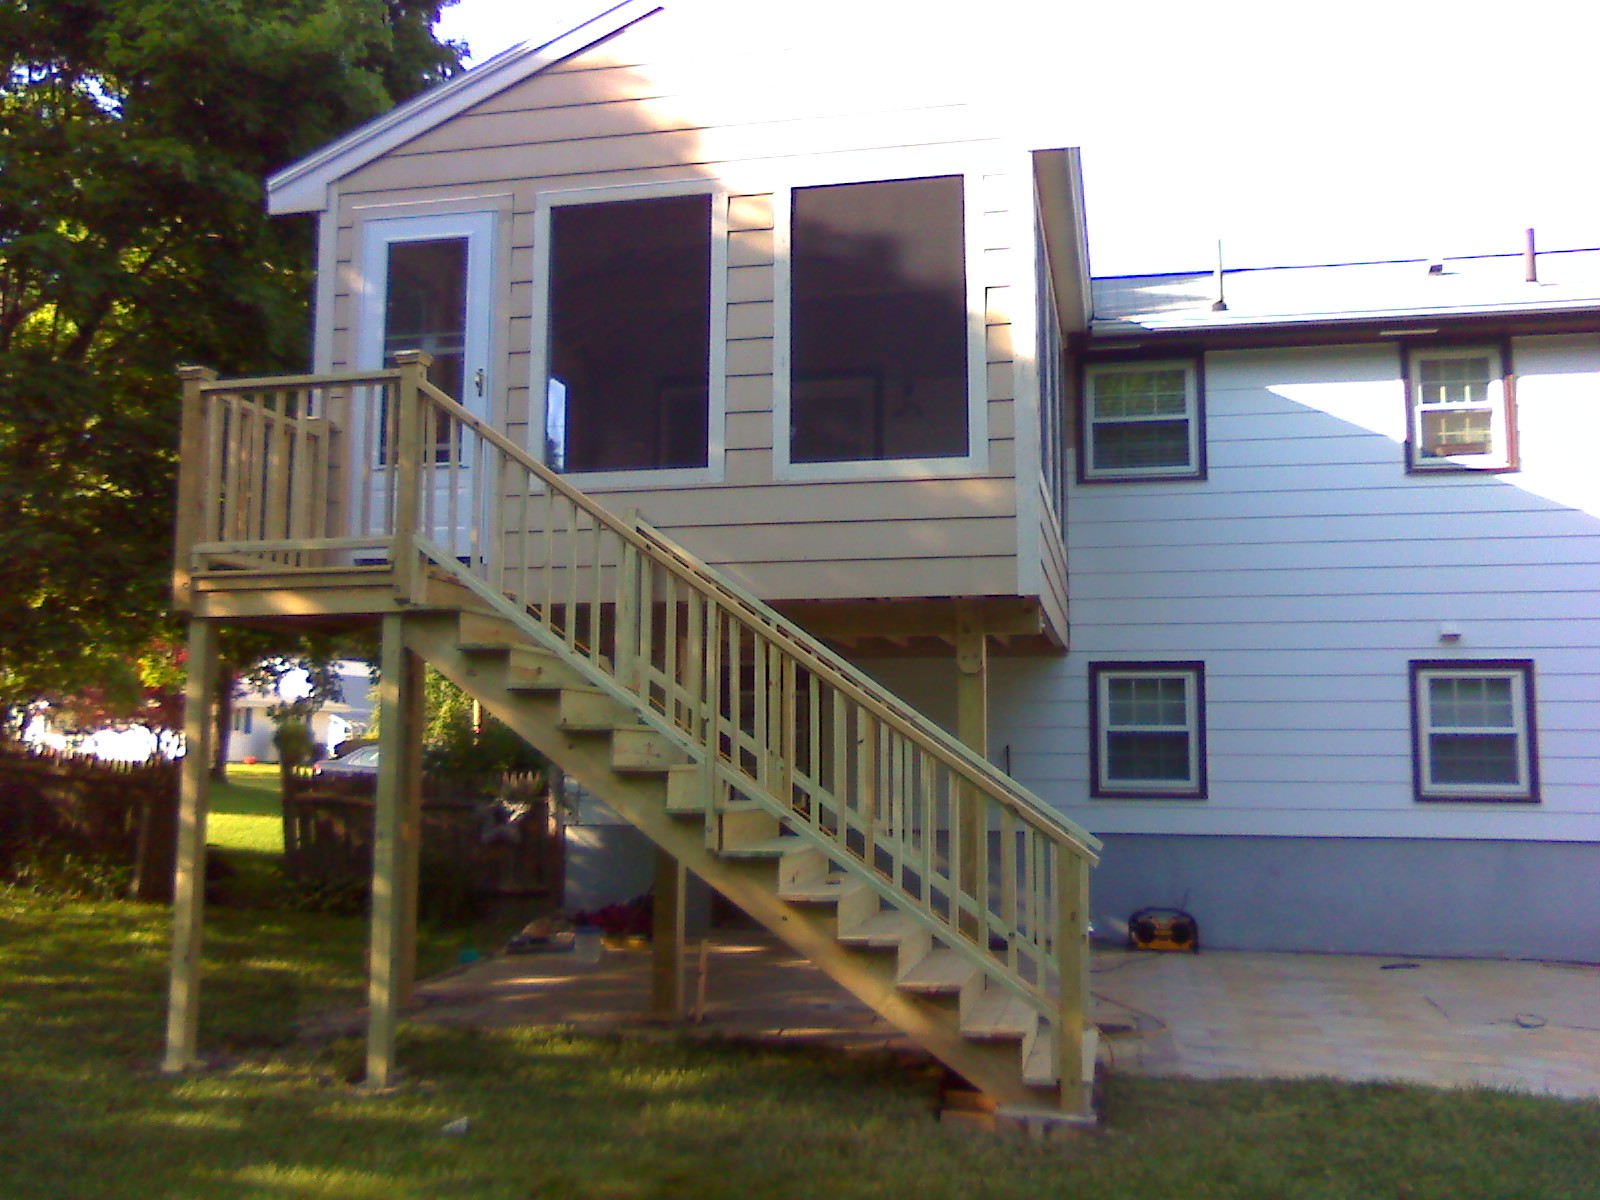 Second-story screened room with outside stair